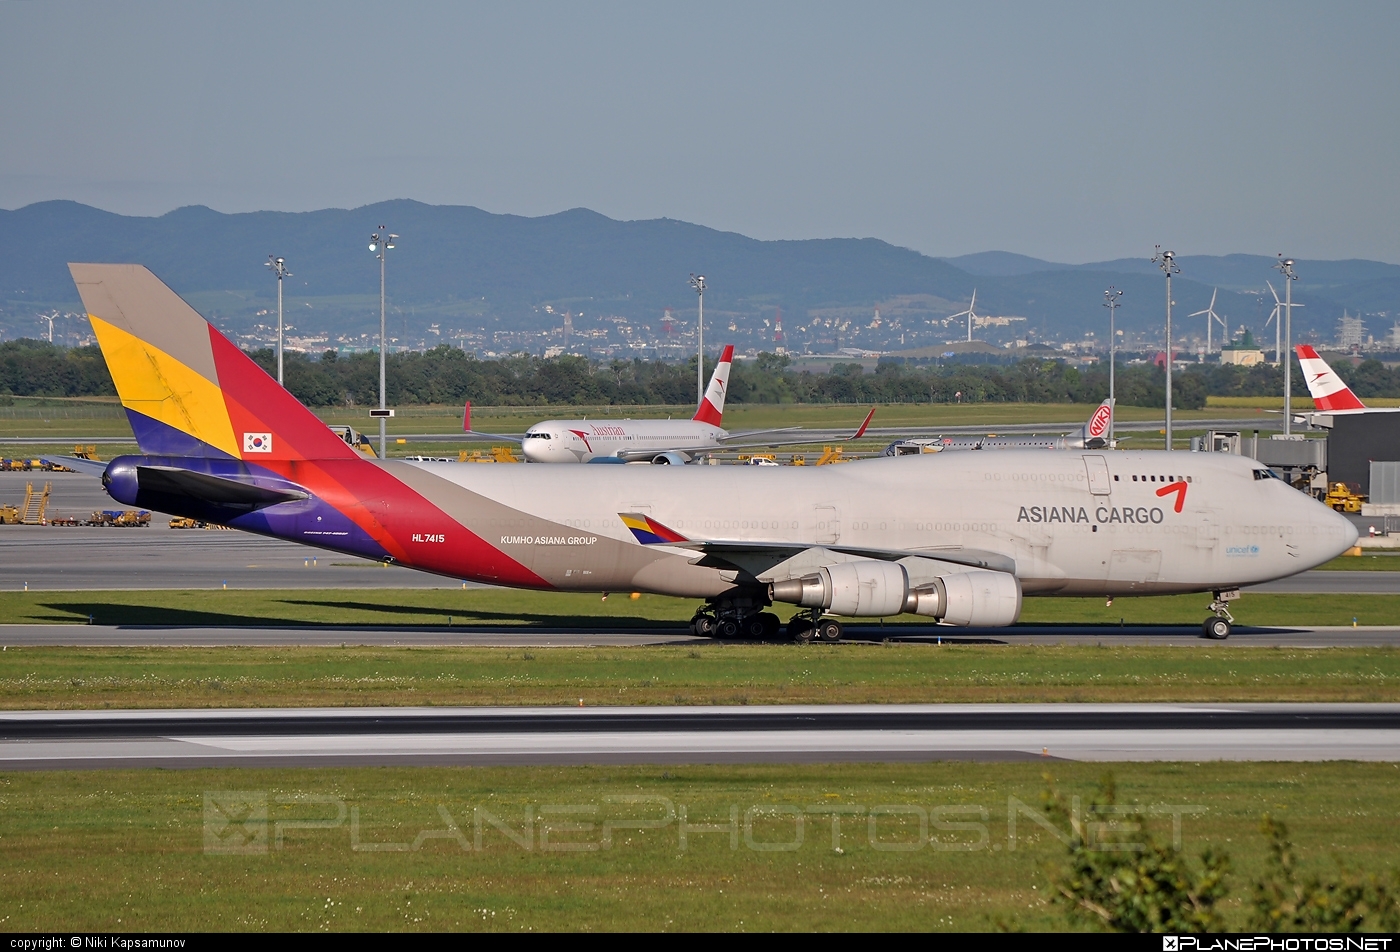 Boeing 747-400BDSF - HL7415 operated by Asiana Cargo #asianacargo #b747 #b747bdsf #b747freighter #bedekspecialfreighter #boeing #boeing747 #jumbo